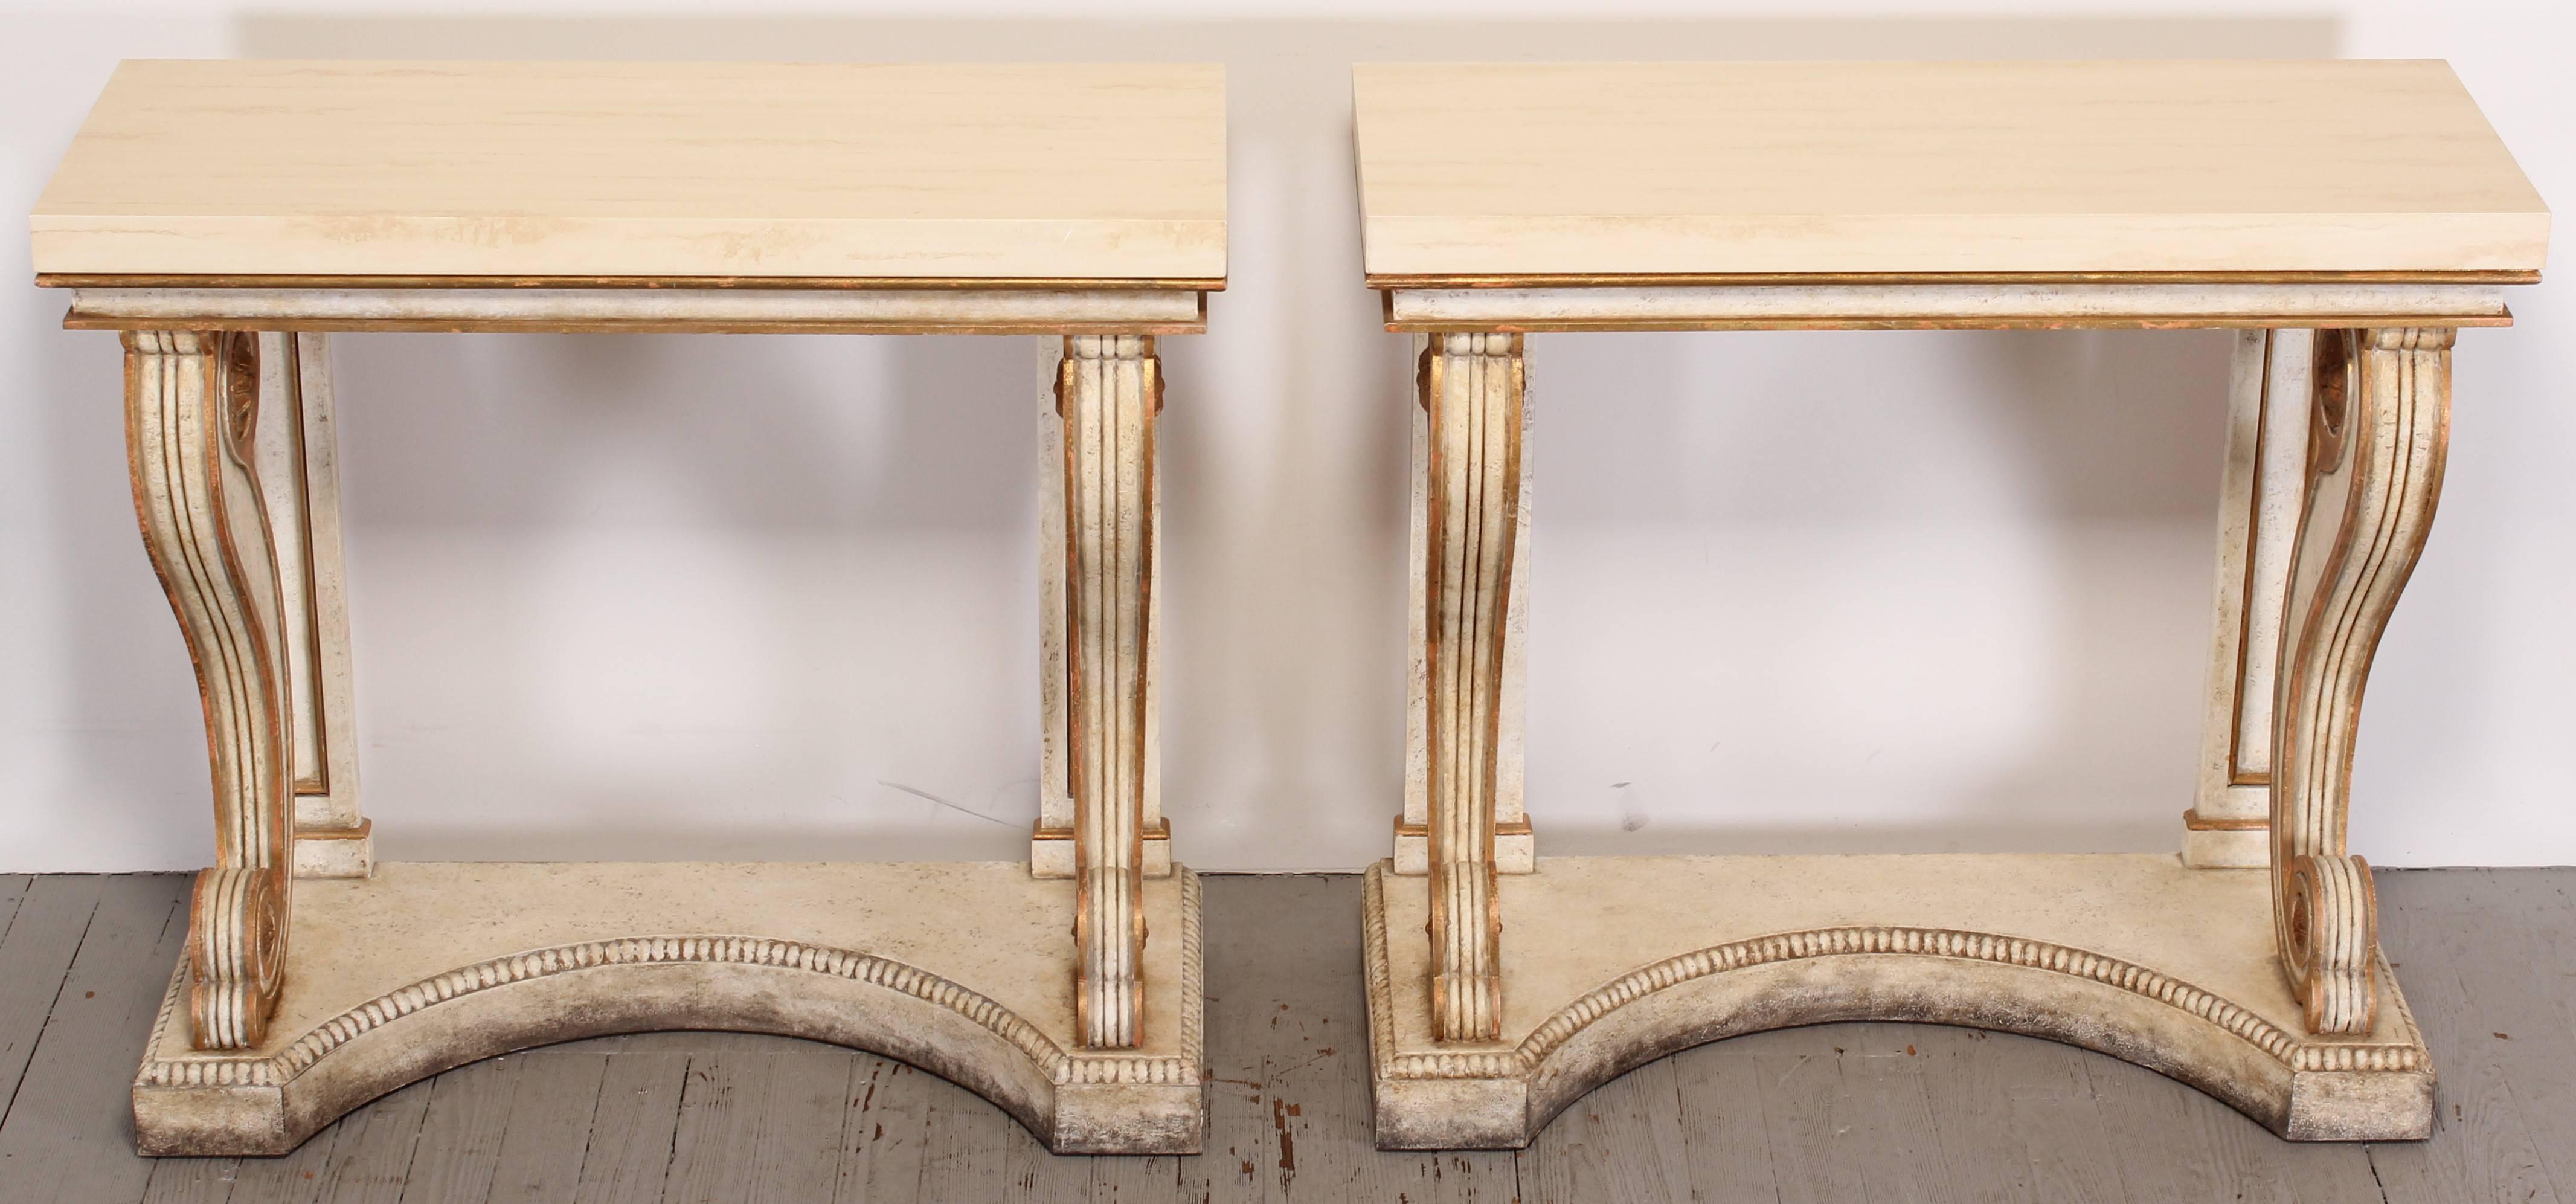 A pair of Neo-Classical Niermann Weeks Blenheim consoles done in Swedish white, Venetian red, gold gilt paint with a faux marble top. Retail price new for the pair of consoles is $18,000.  These unique consoles were created by the designer to look